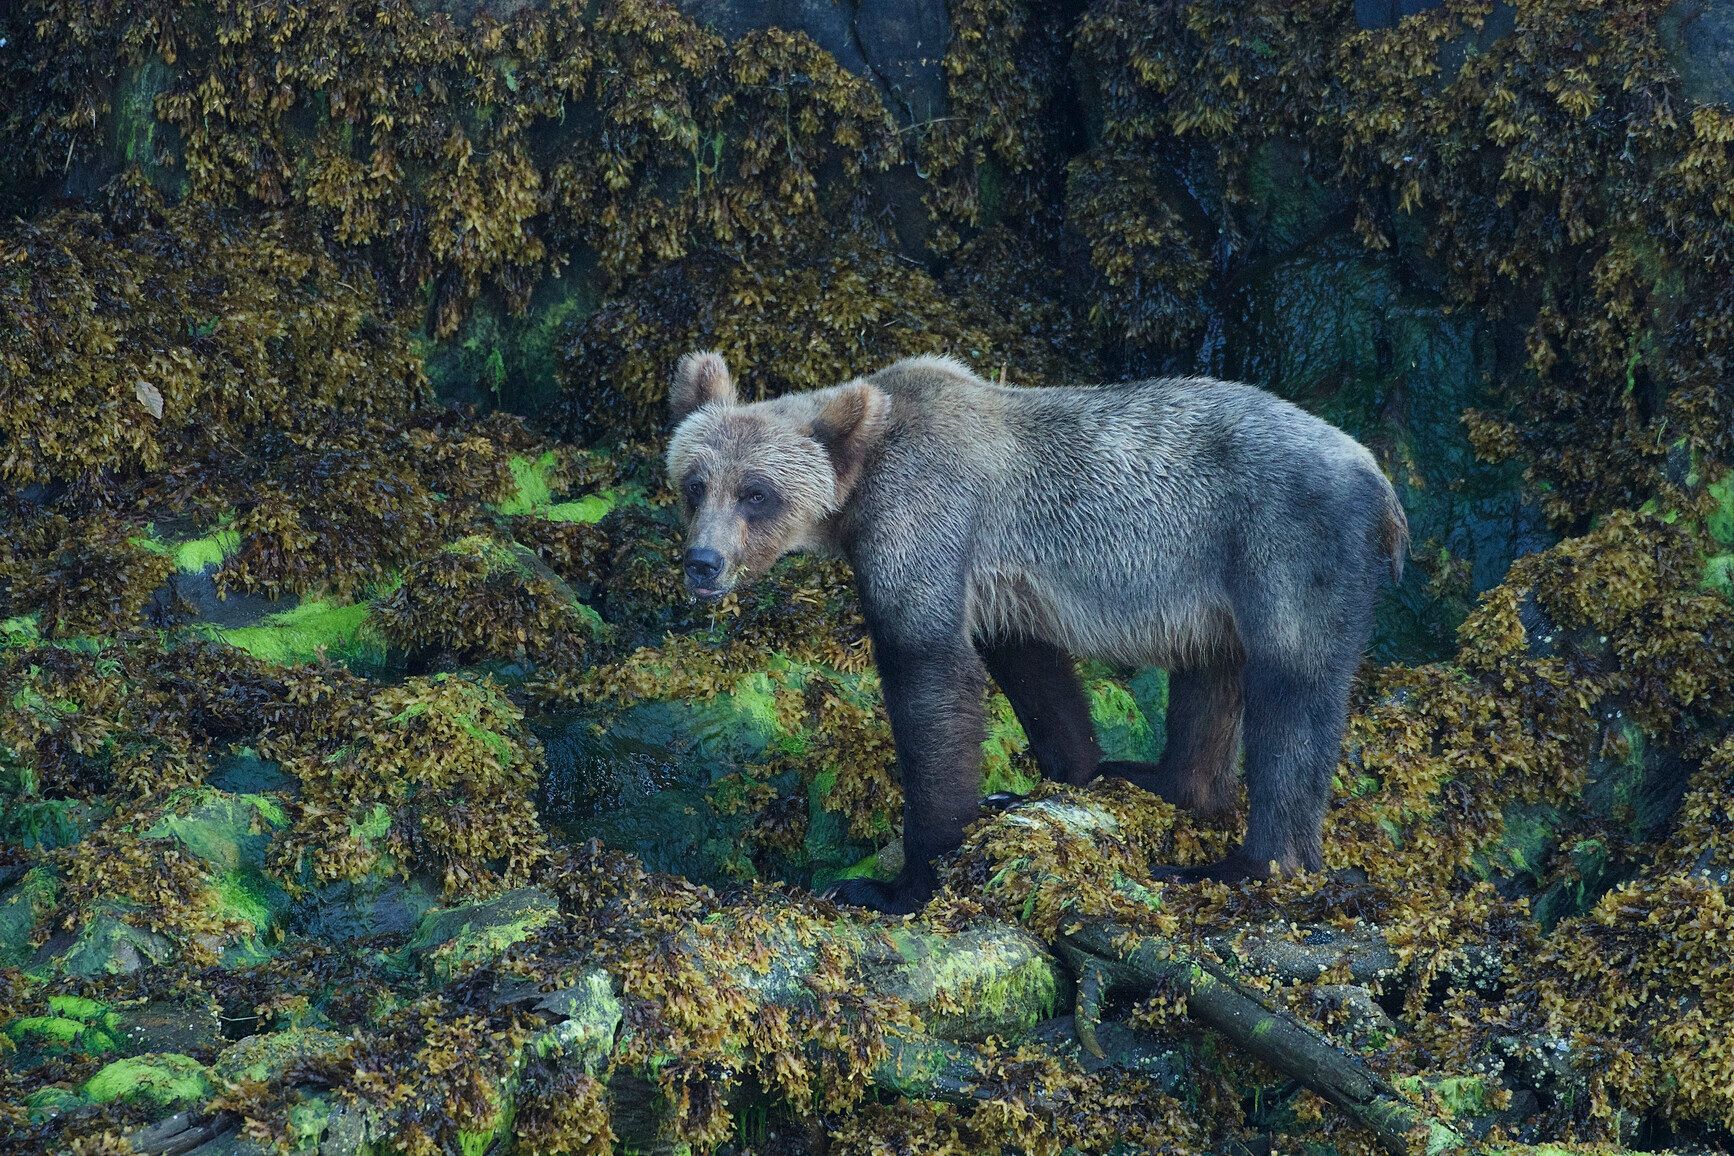 In Khutzeymateen Park, a thin grizzly bear (Ursus arctos horribilis) wanders the shoreline in the spring.